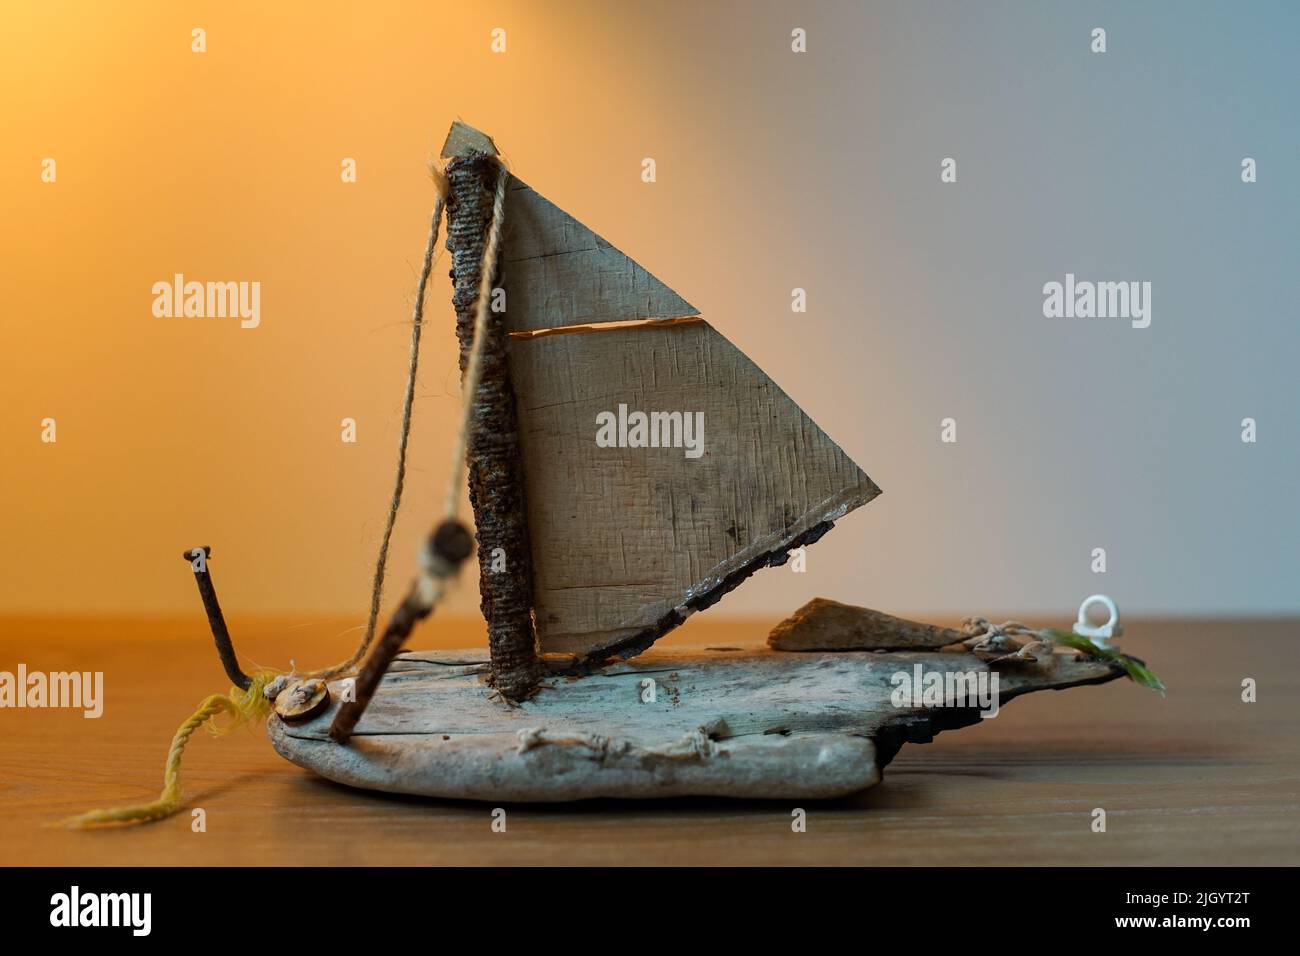 A Bark Ship Craft On A Wooden Table Stock Photo - Alamy